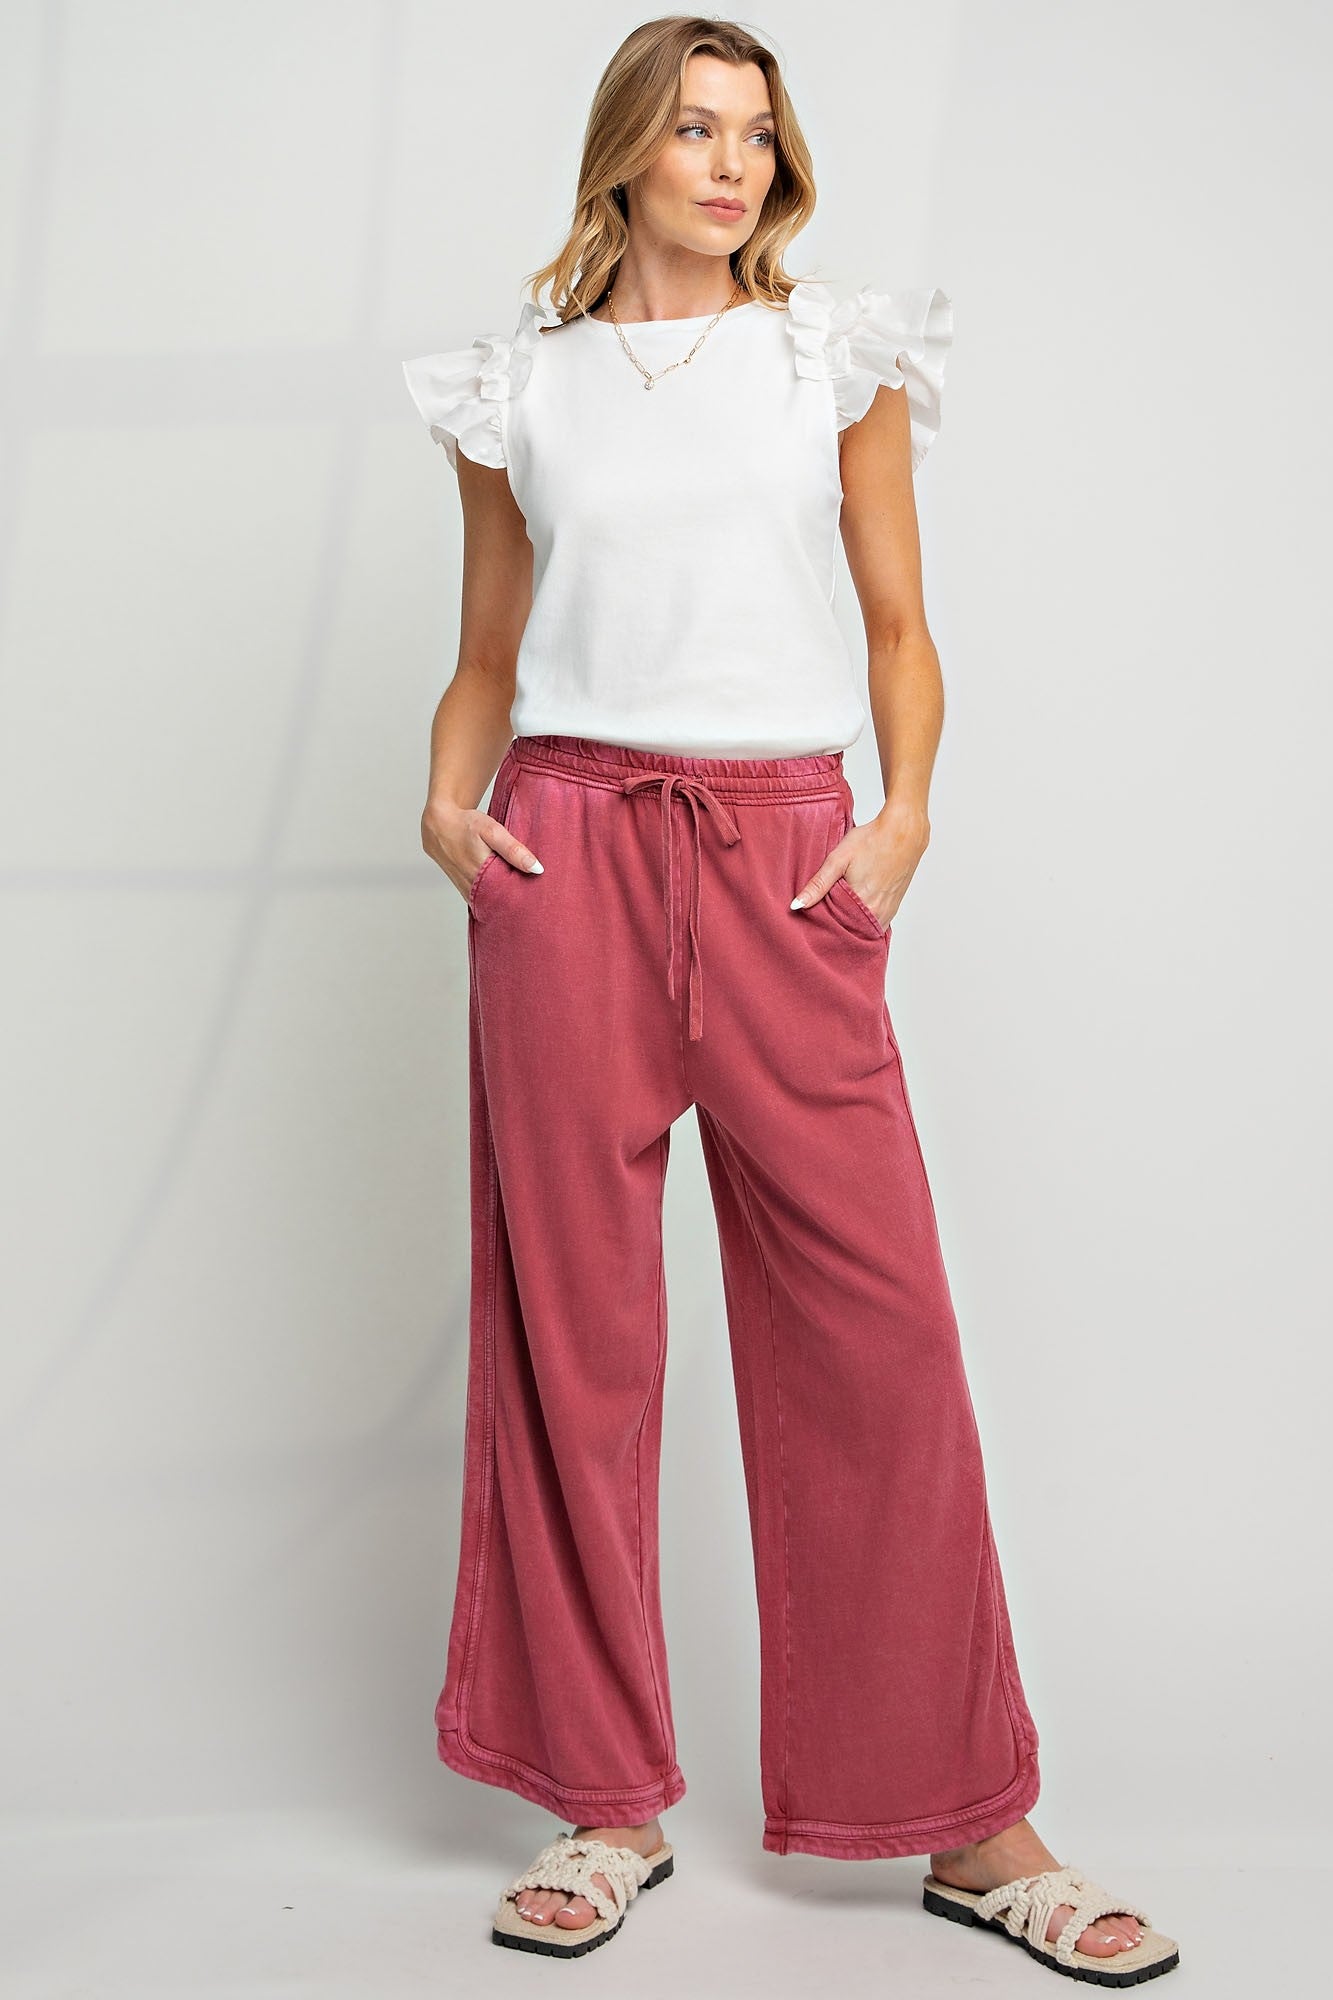 Easel Mineral Washed Terry Knit Pants in Wine – June Adel